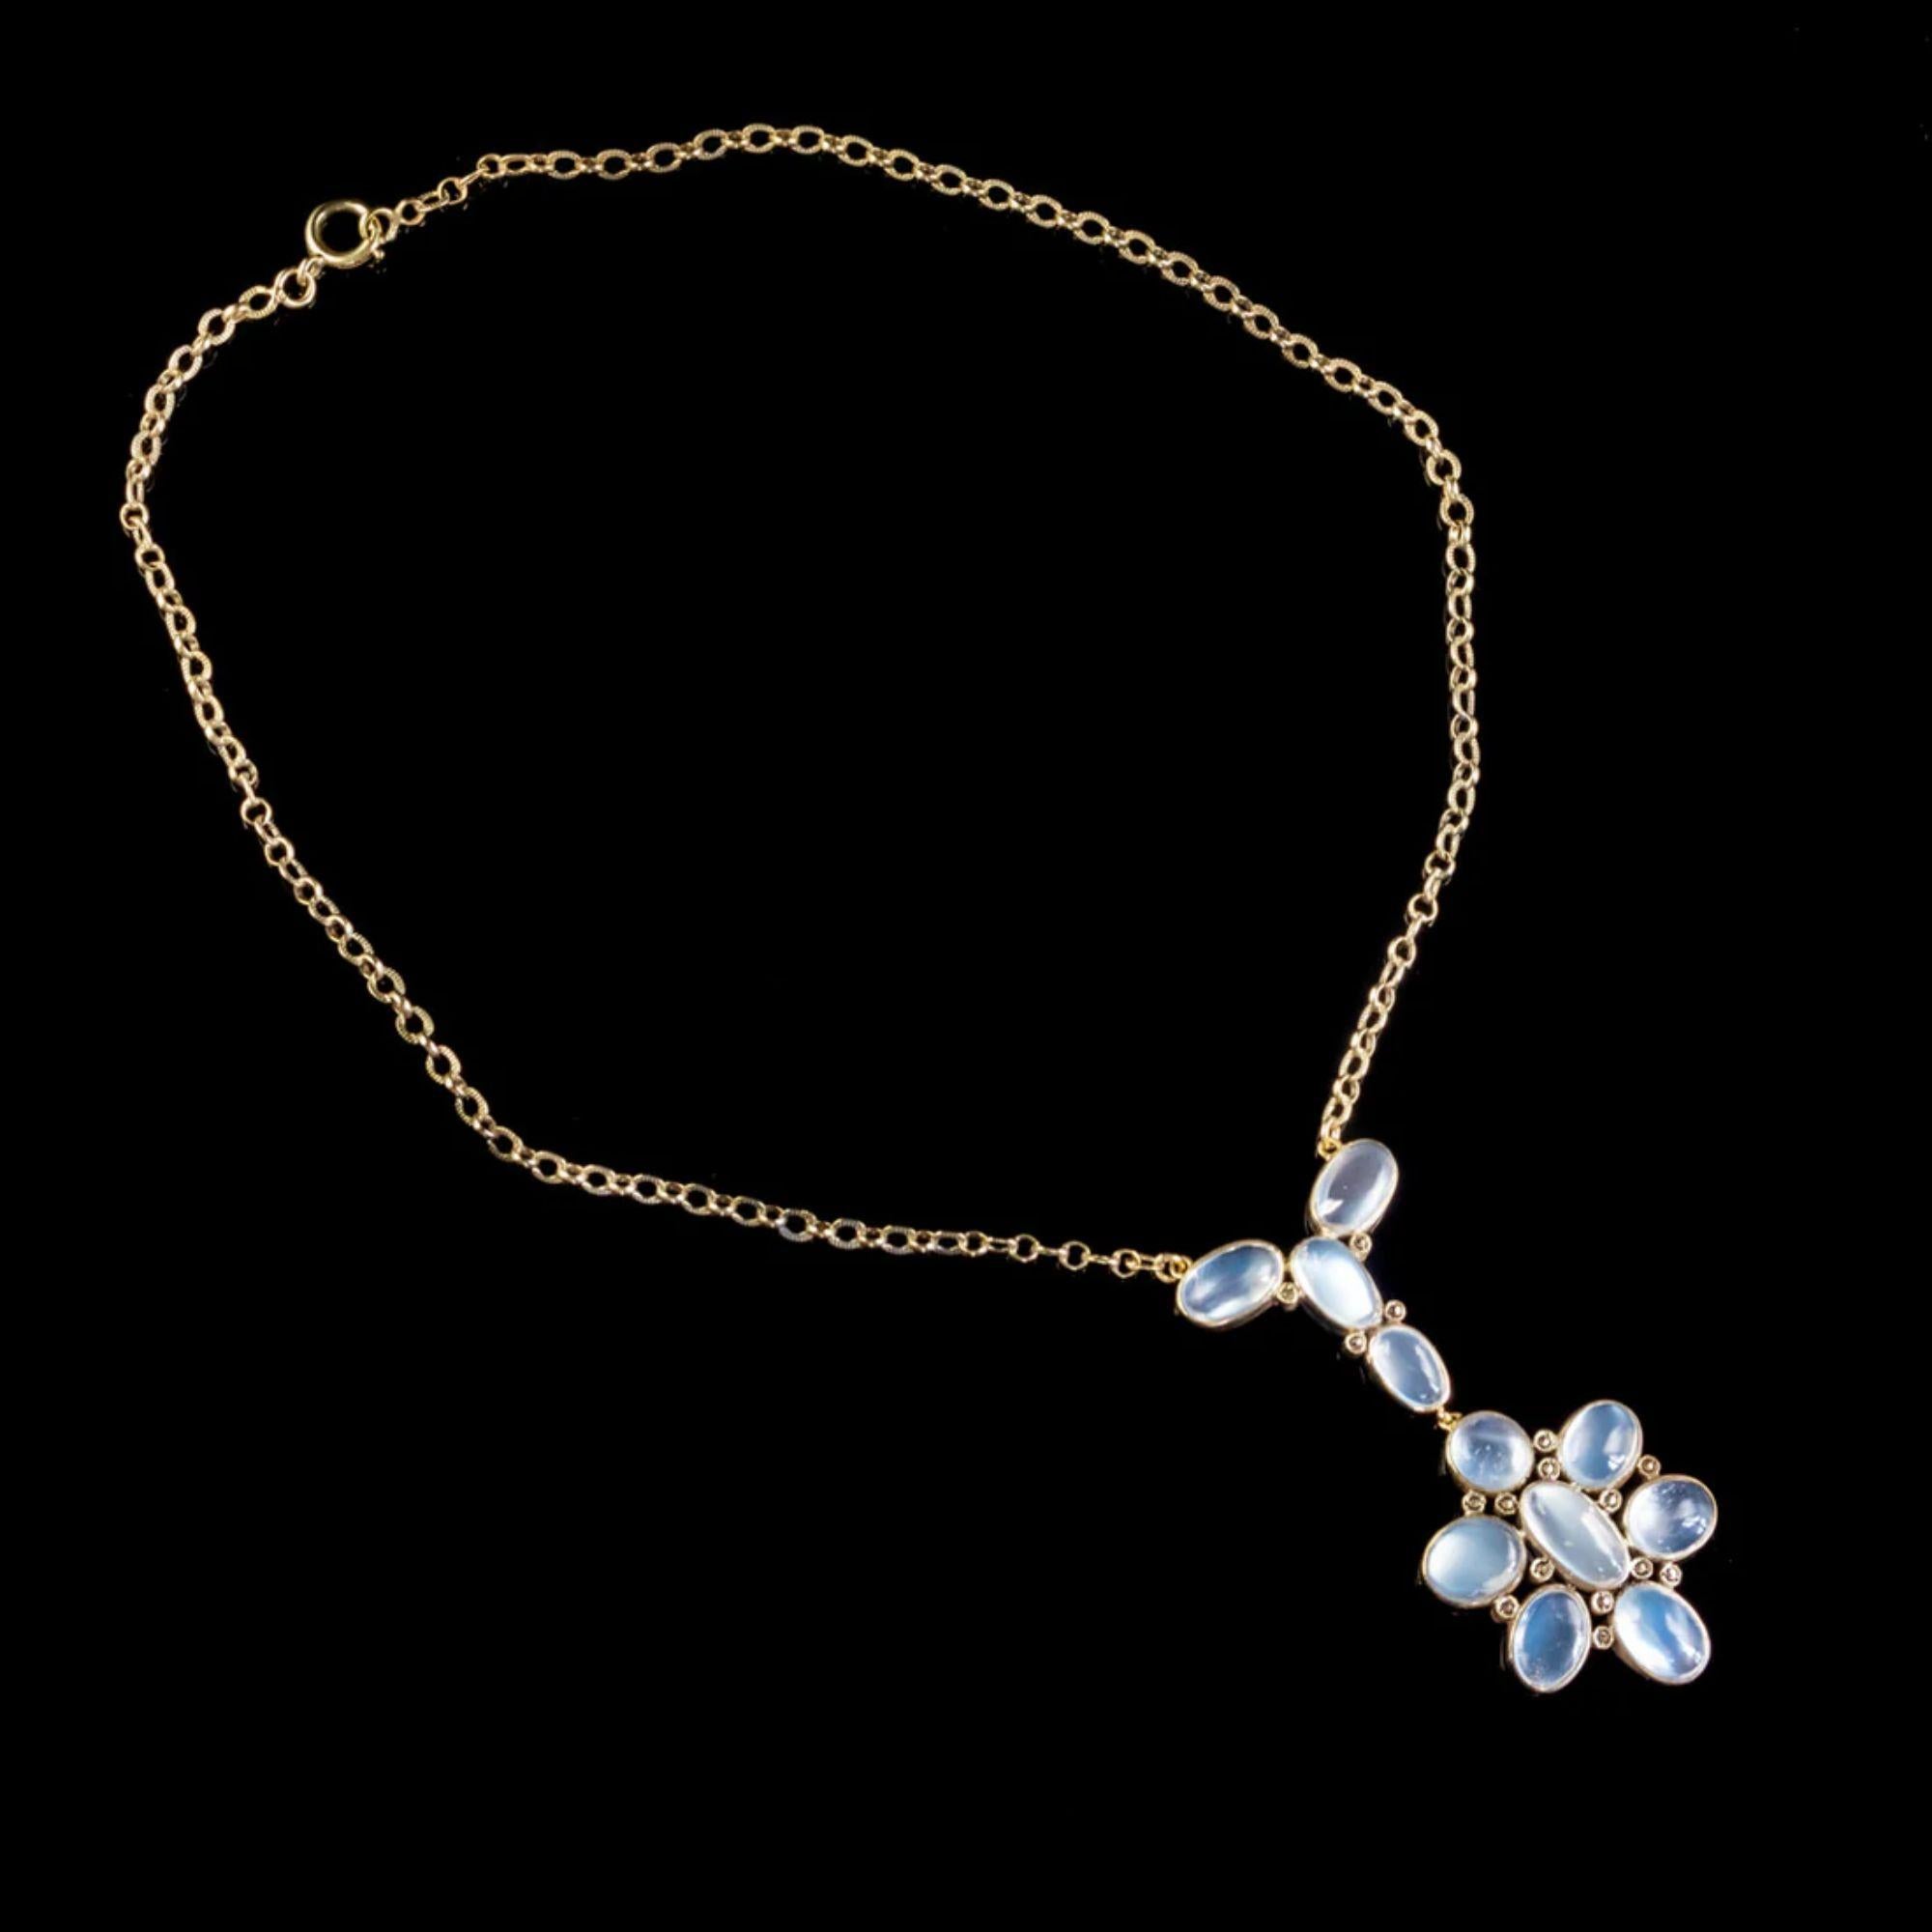 A fabulous antique Edwardian moonstone lavaliere necklace modelled in silver and gilded in 18ct yellow gold. It features a distinctive pendant, bezel set with eleven cabochon moonstones (approx. 17ct total) arranged in an abstract, flower